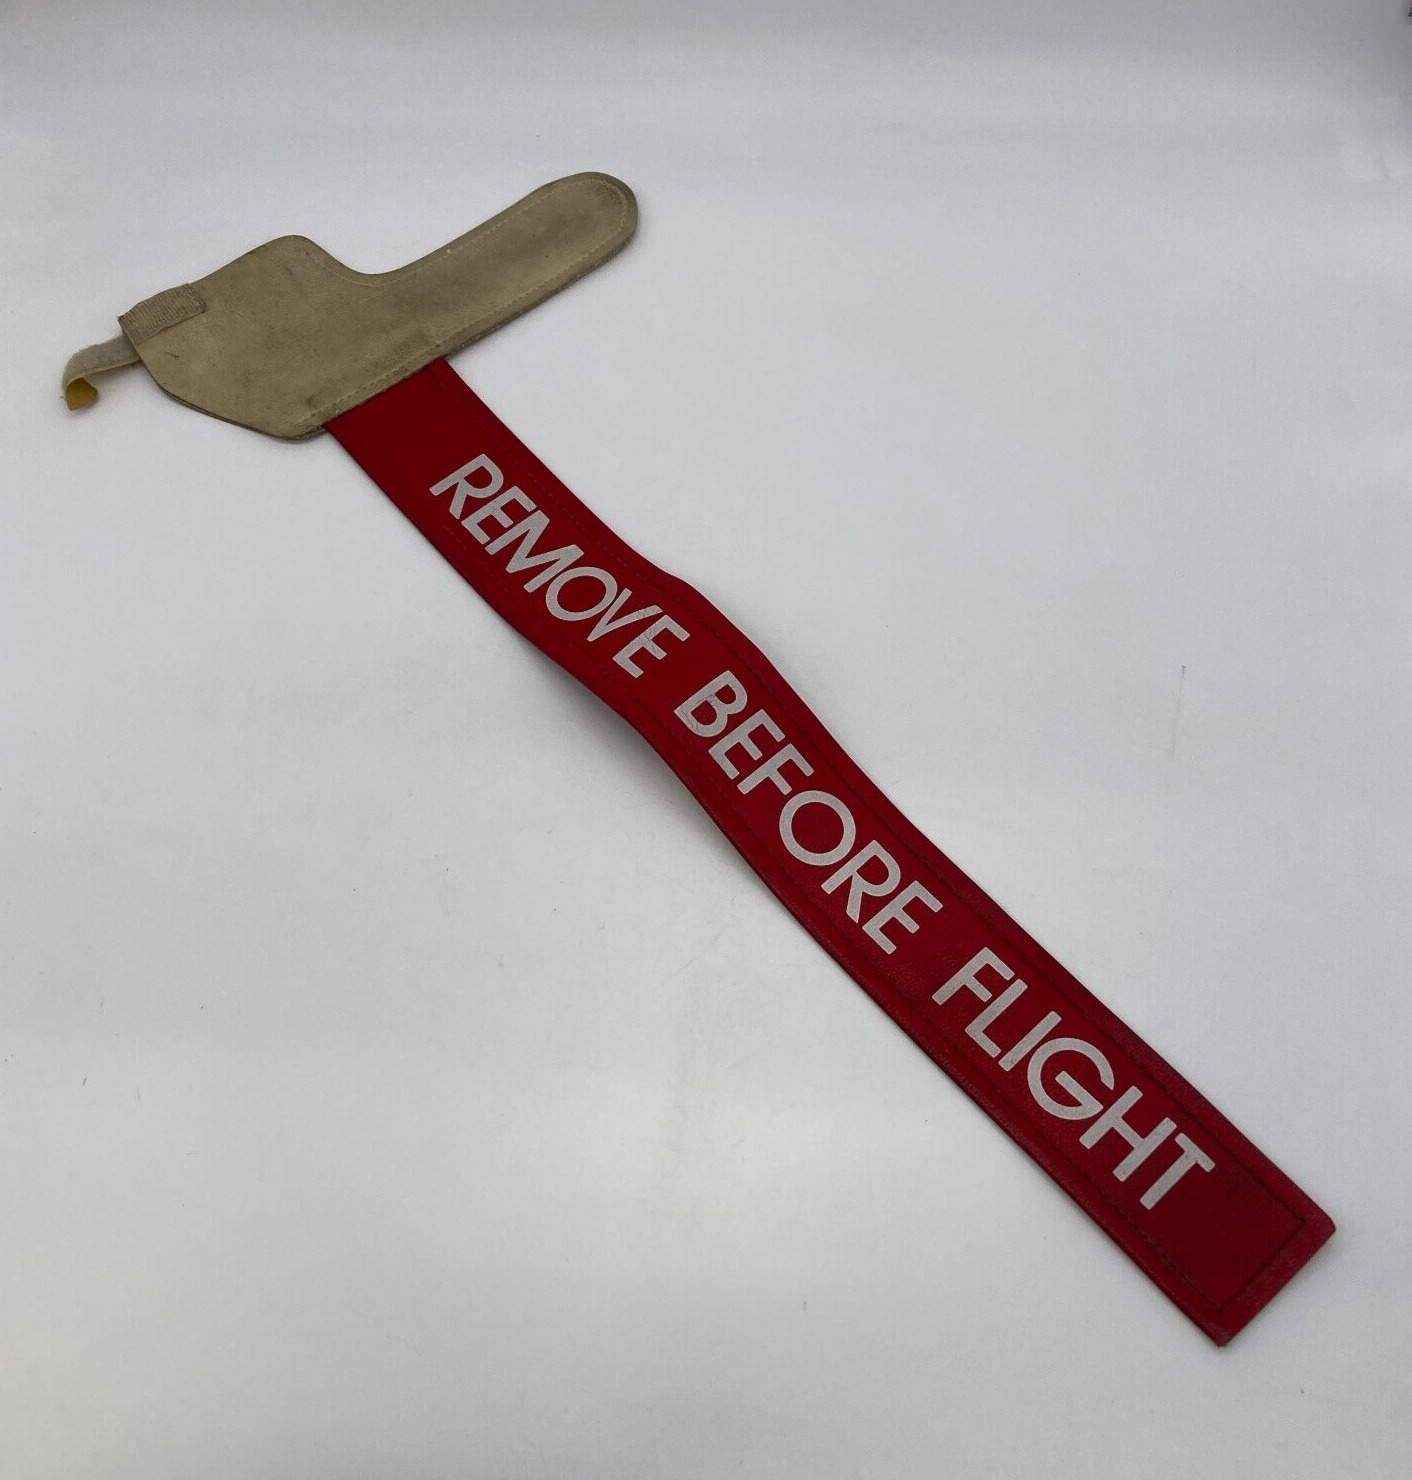 Vintage Aircraft Flag: REMOVE BEFORE FLIGHT- Red and Tan Leather